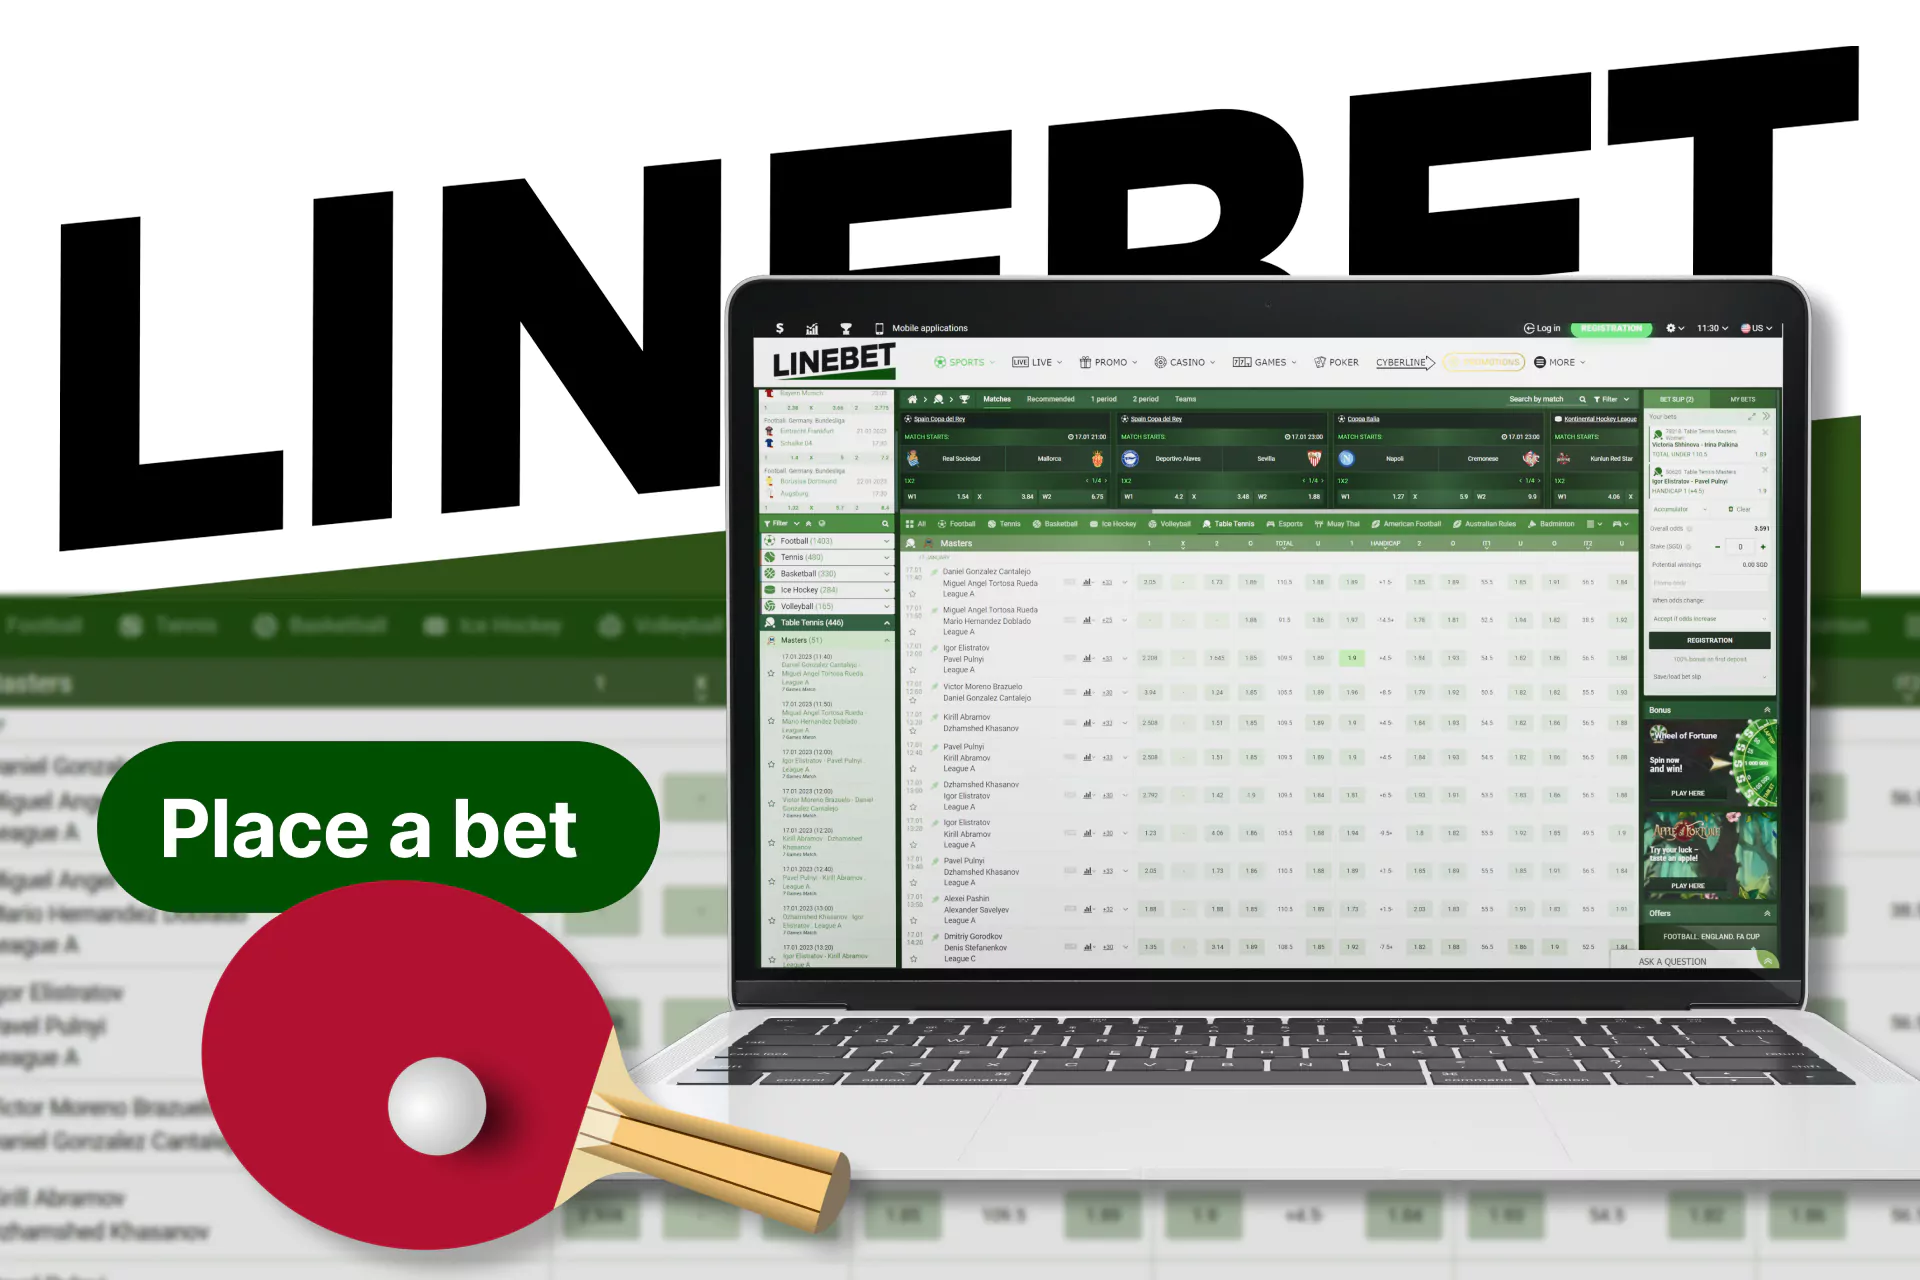 Try different types of table tennis bets in Linebet.